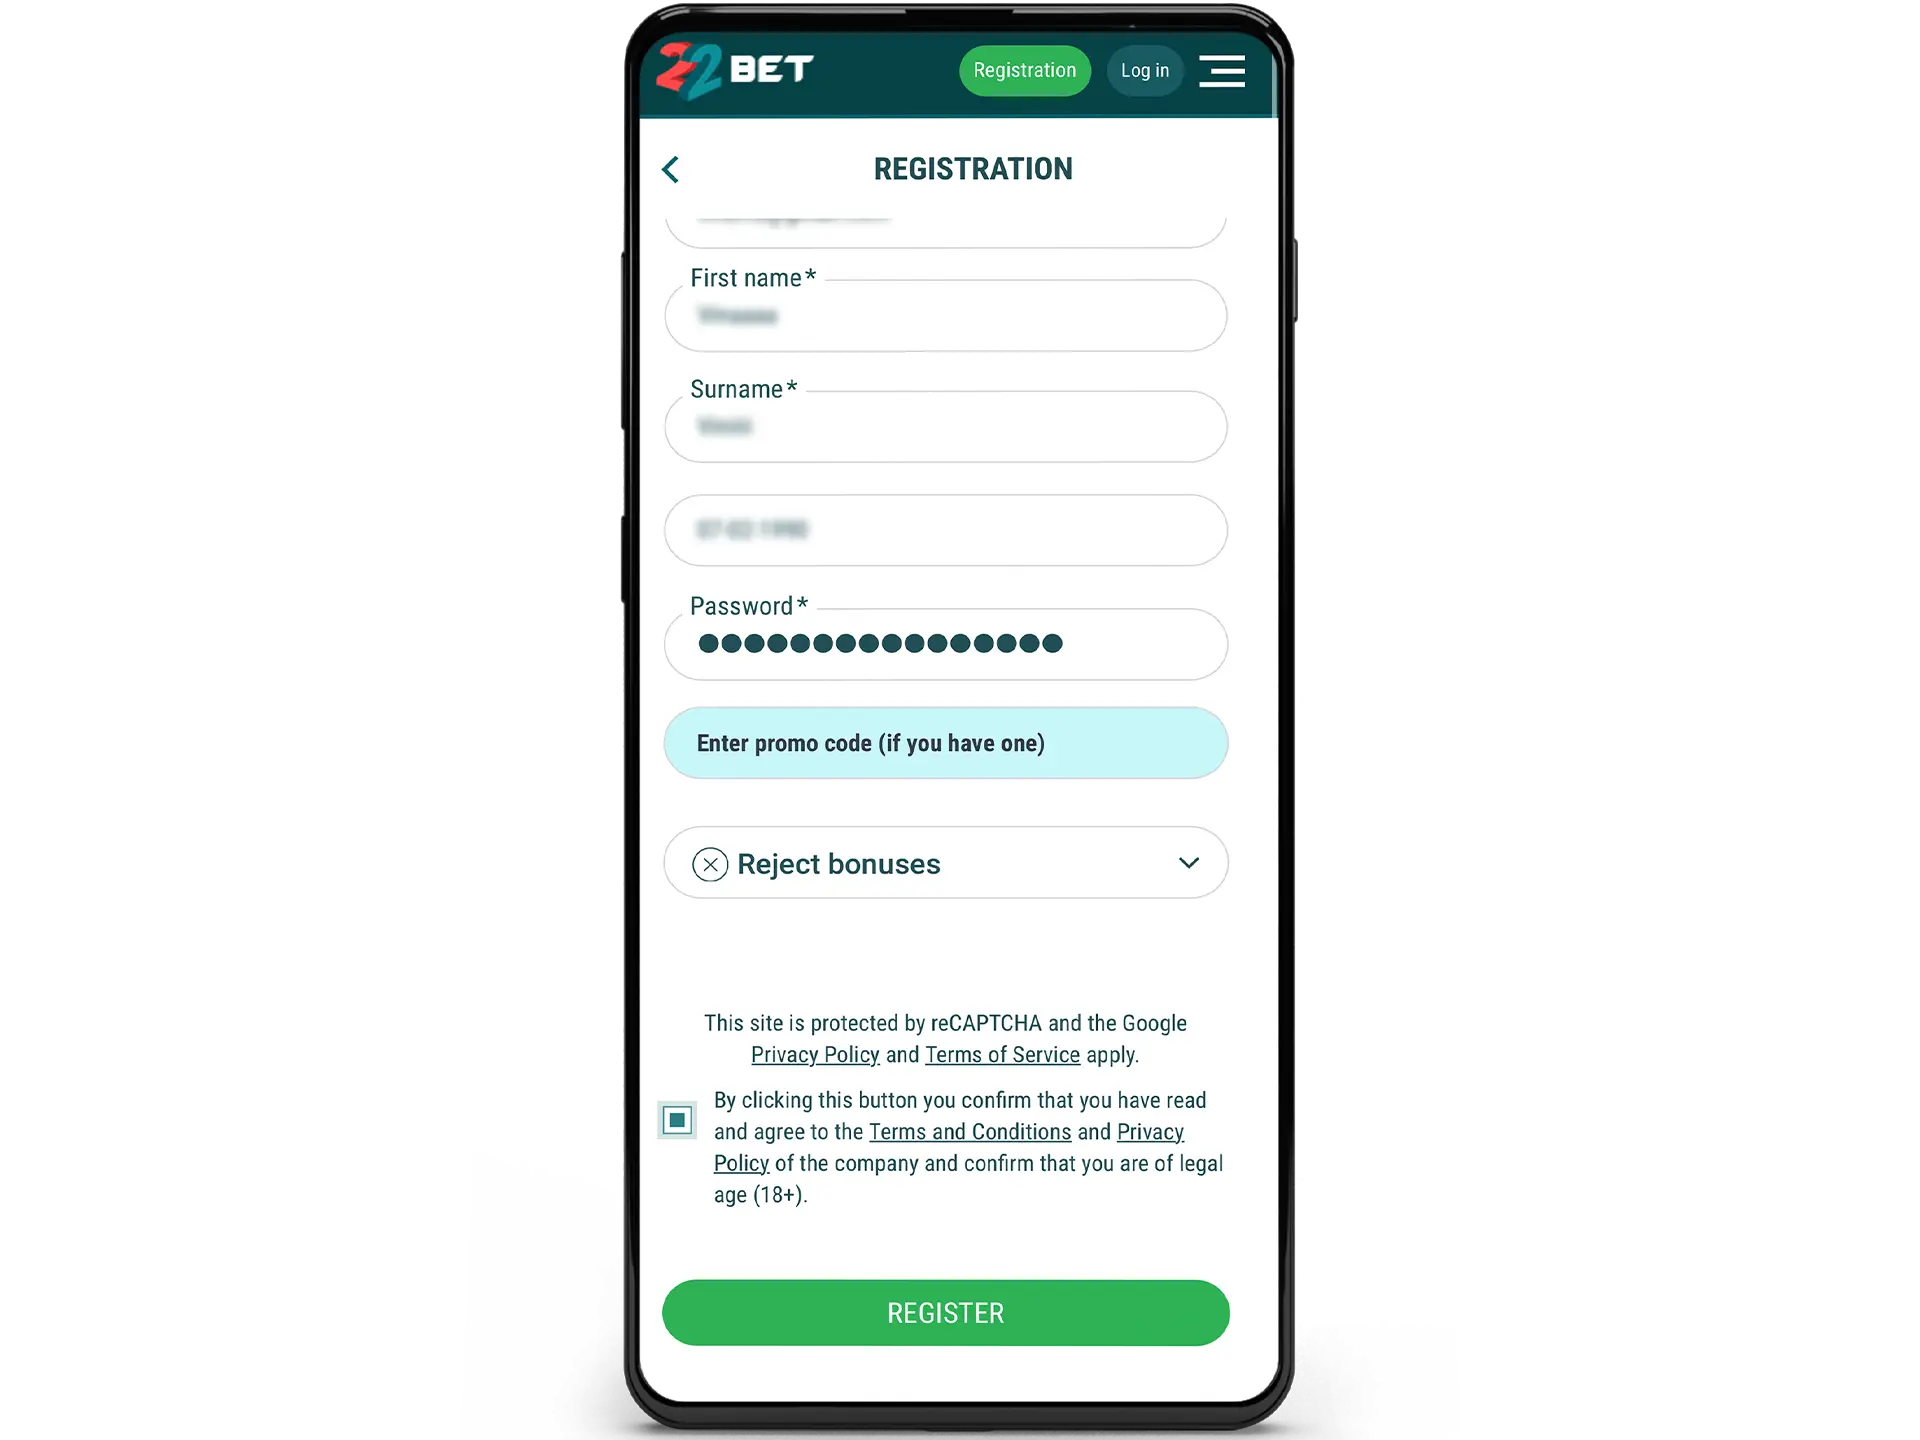 Complete the 22Bet registration process.